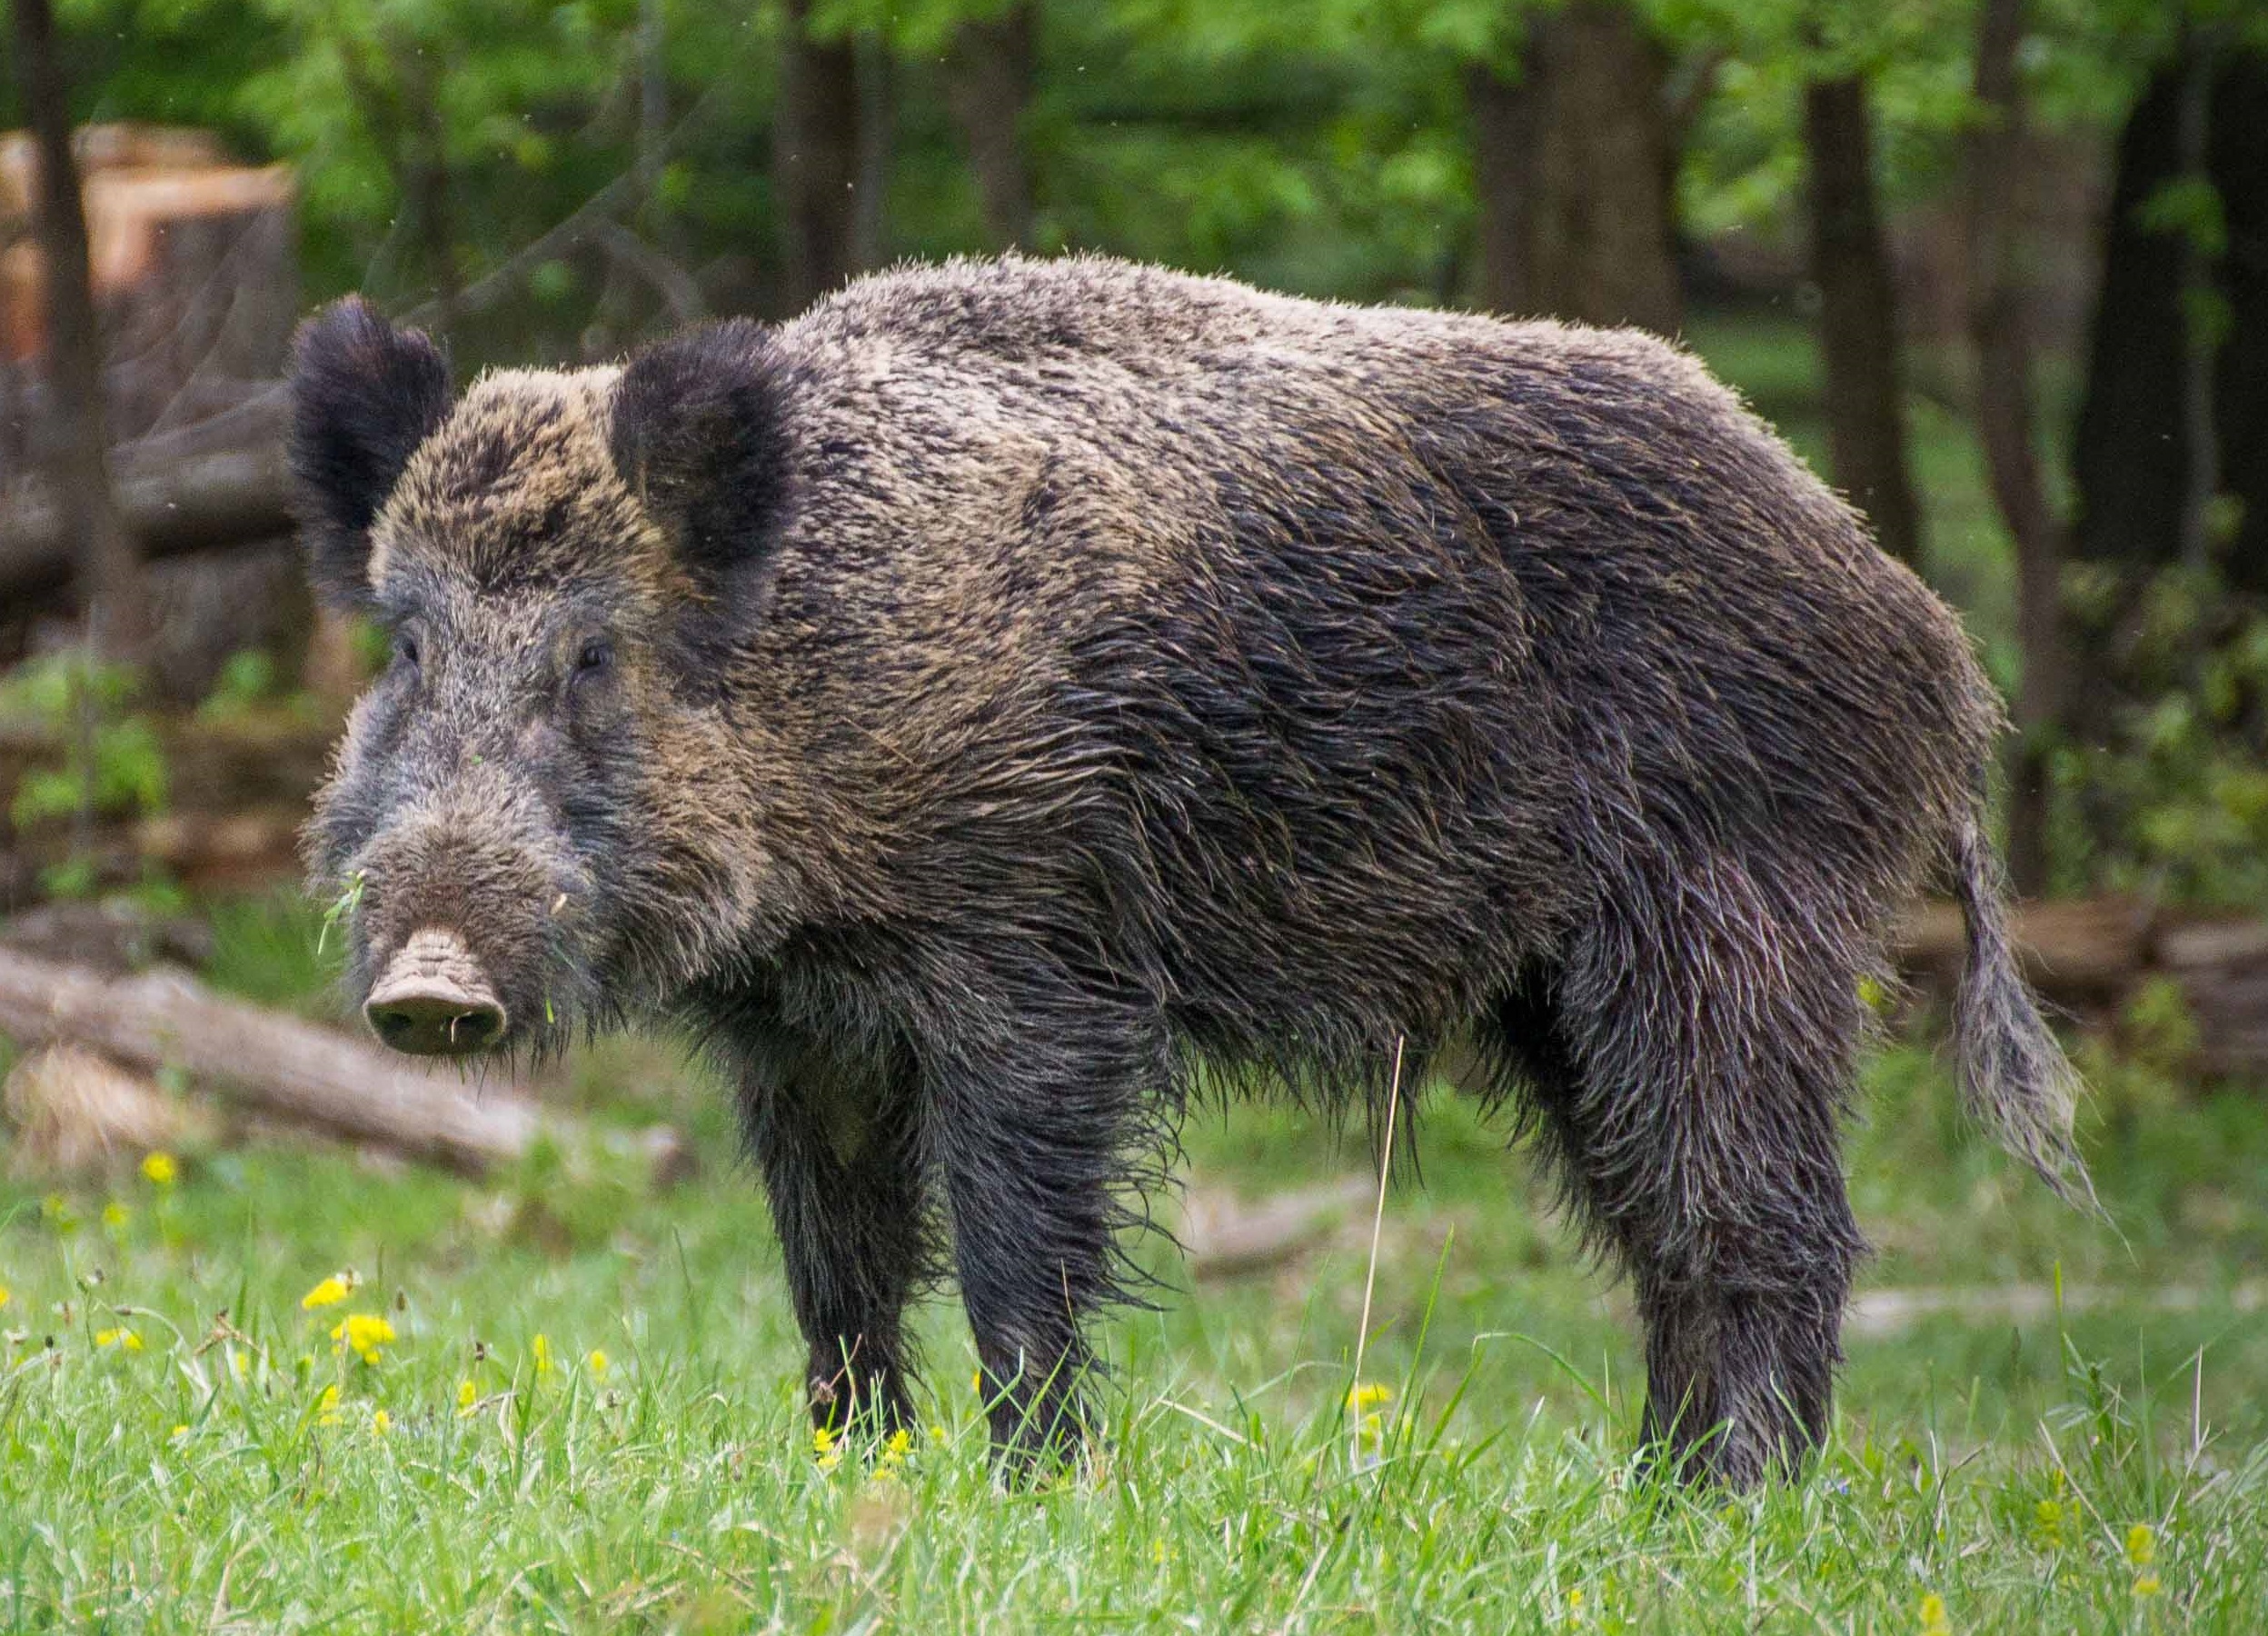 What are groups of wild pigs called?